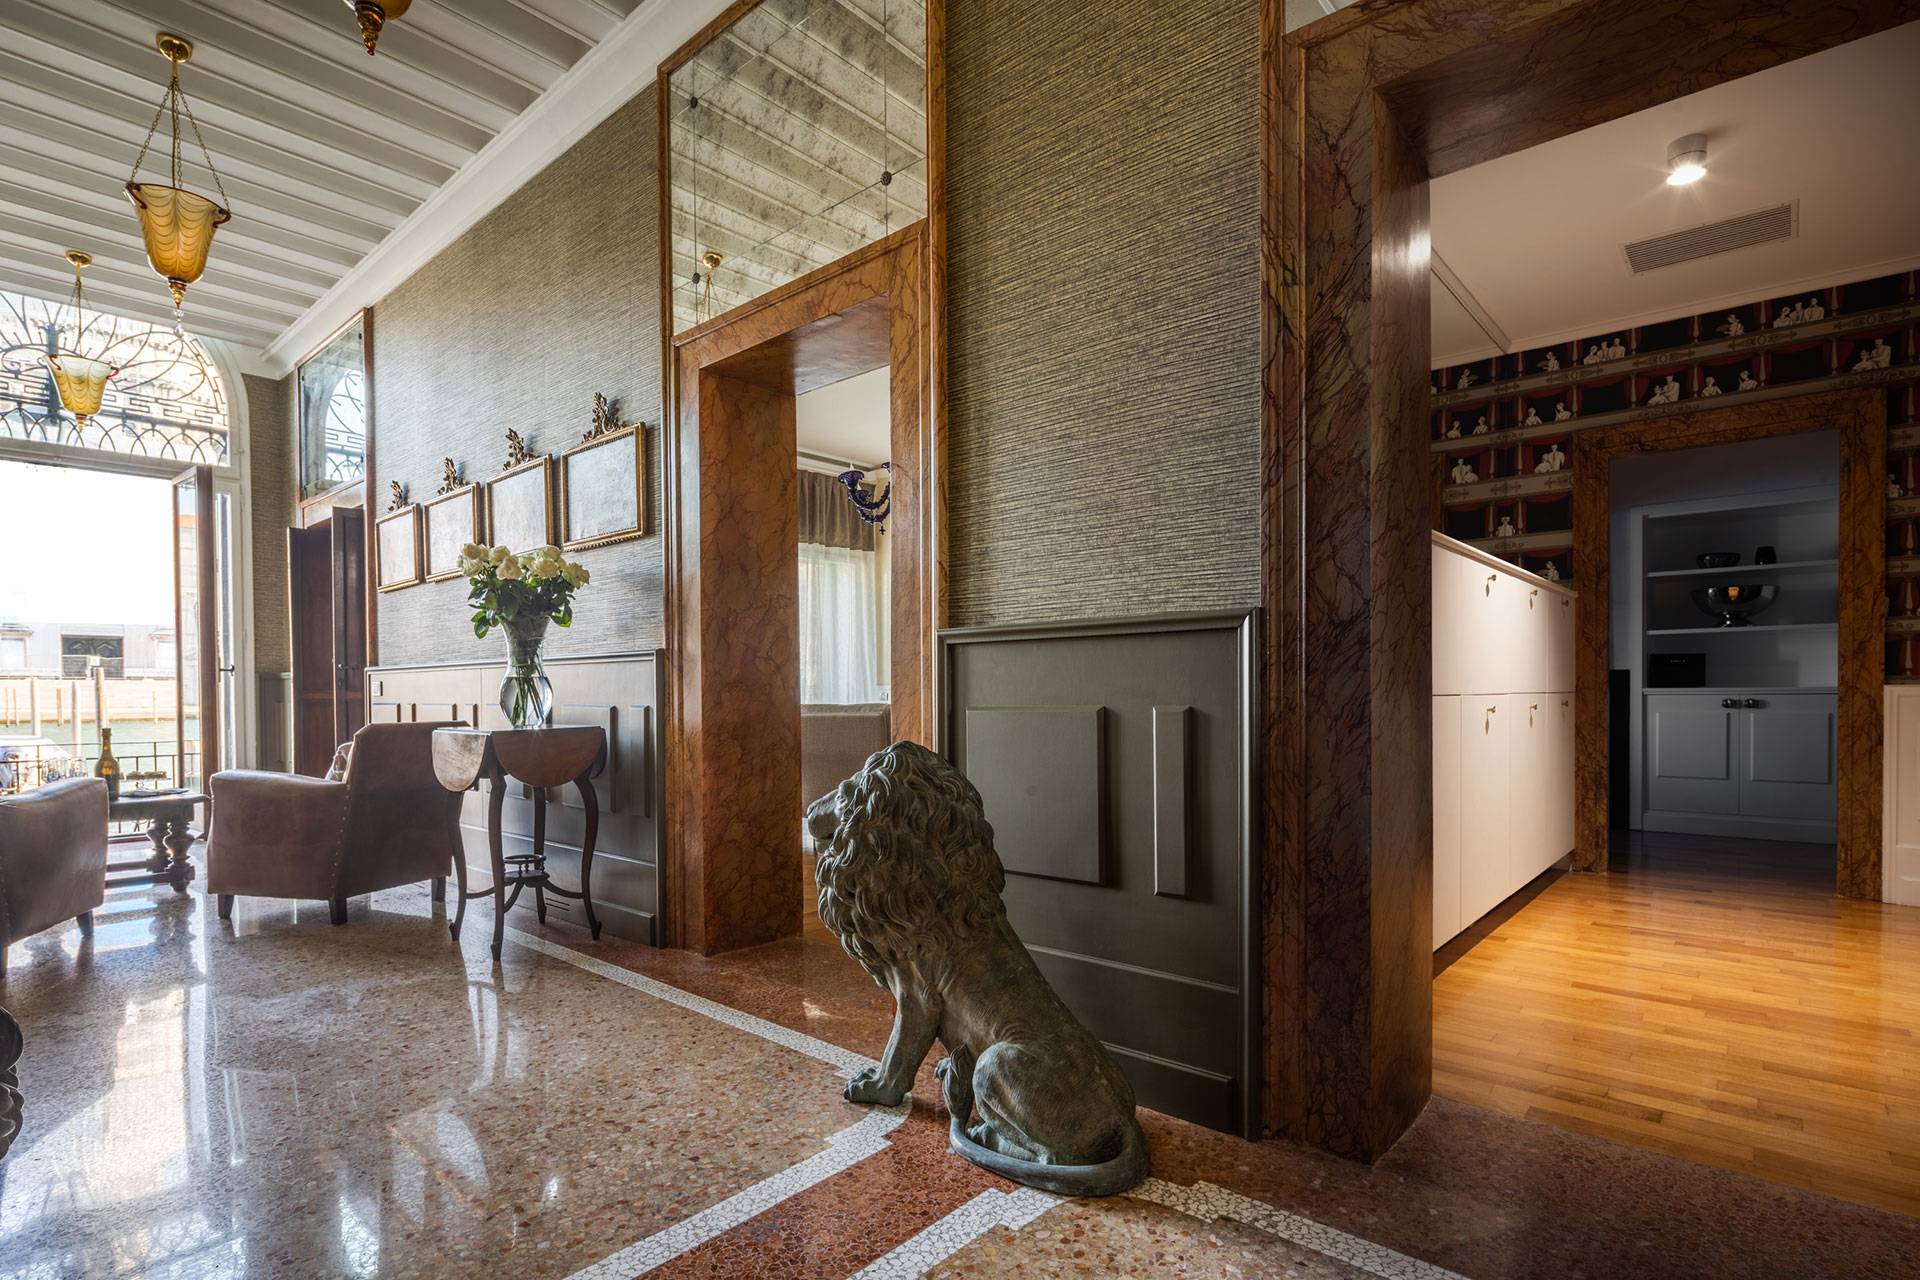 From the entrance hall you can access to the terrace on the Gran Canal